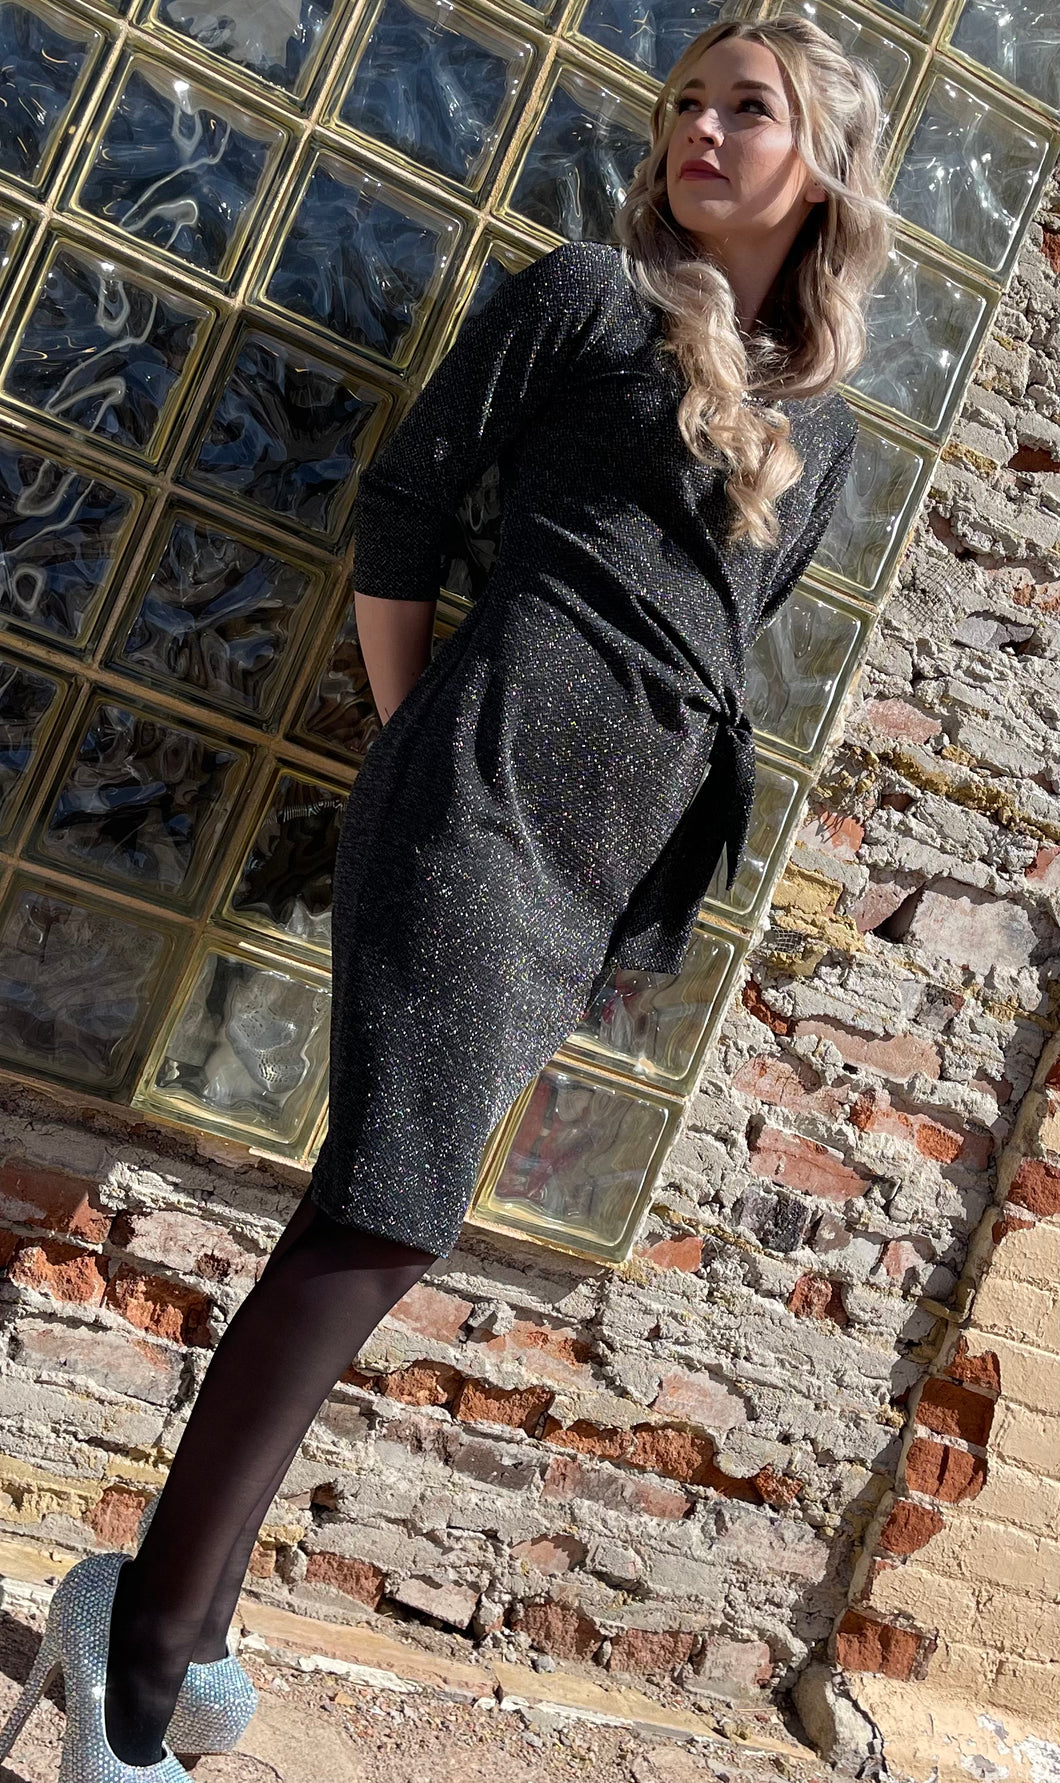 Sparkly Side-Tie Dress - Black and Silver